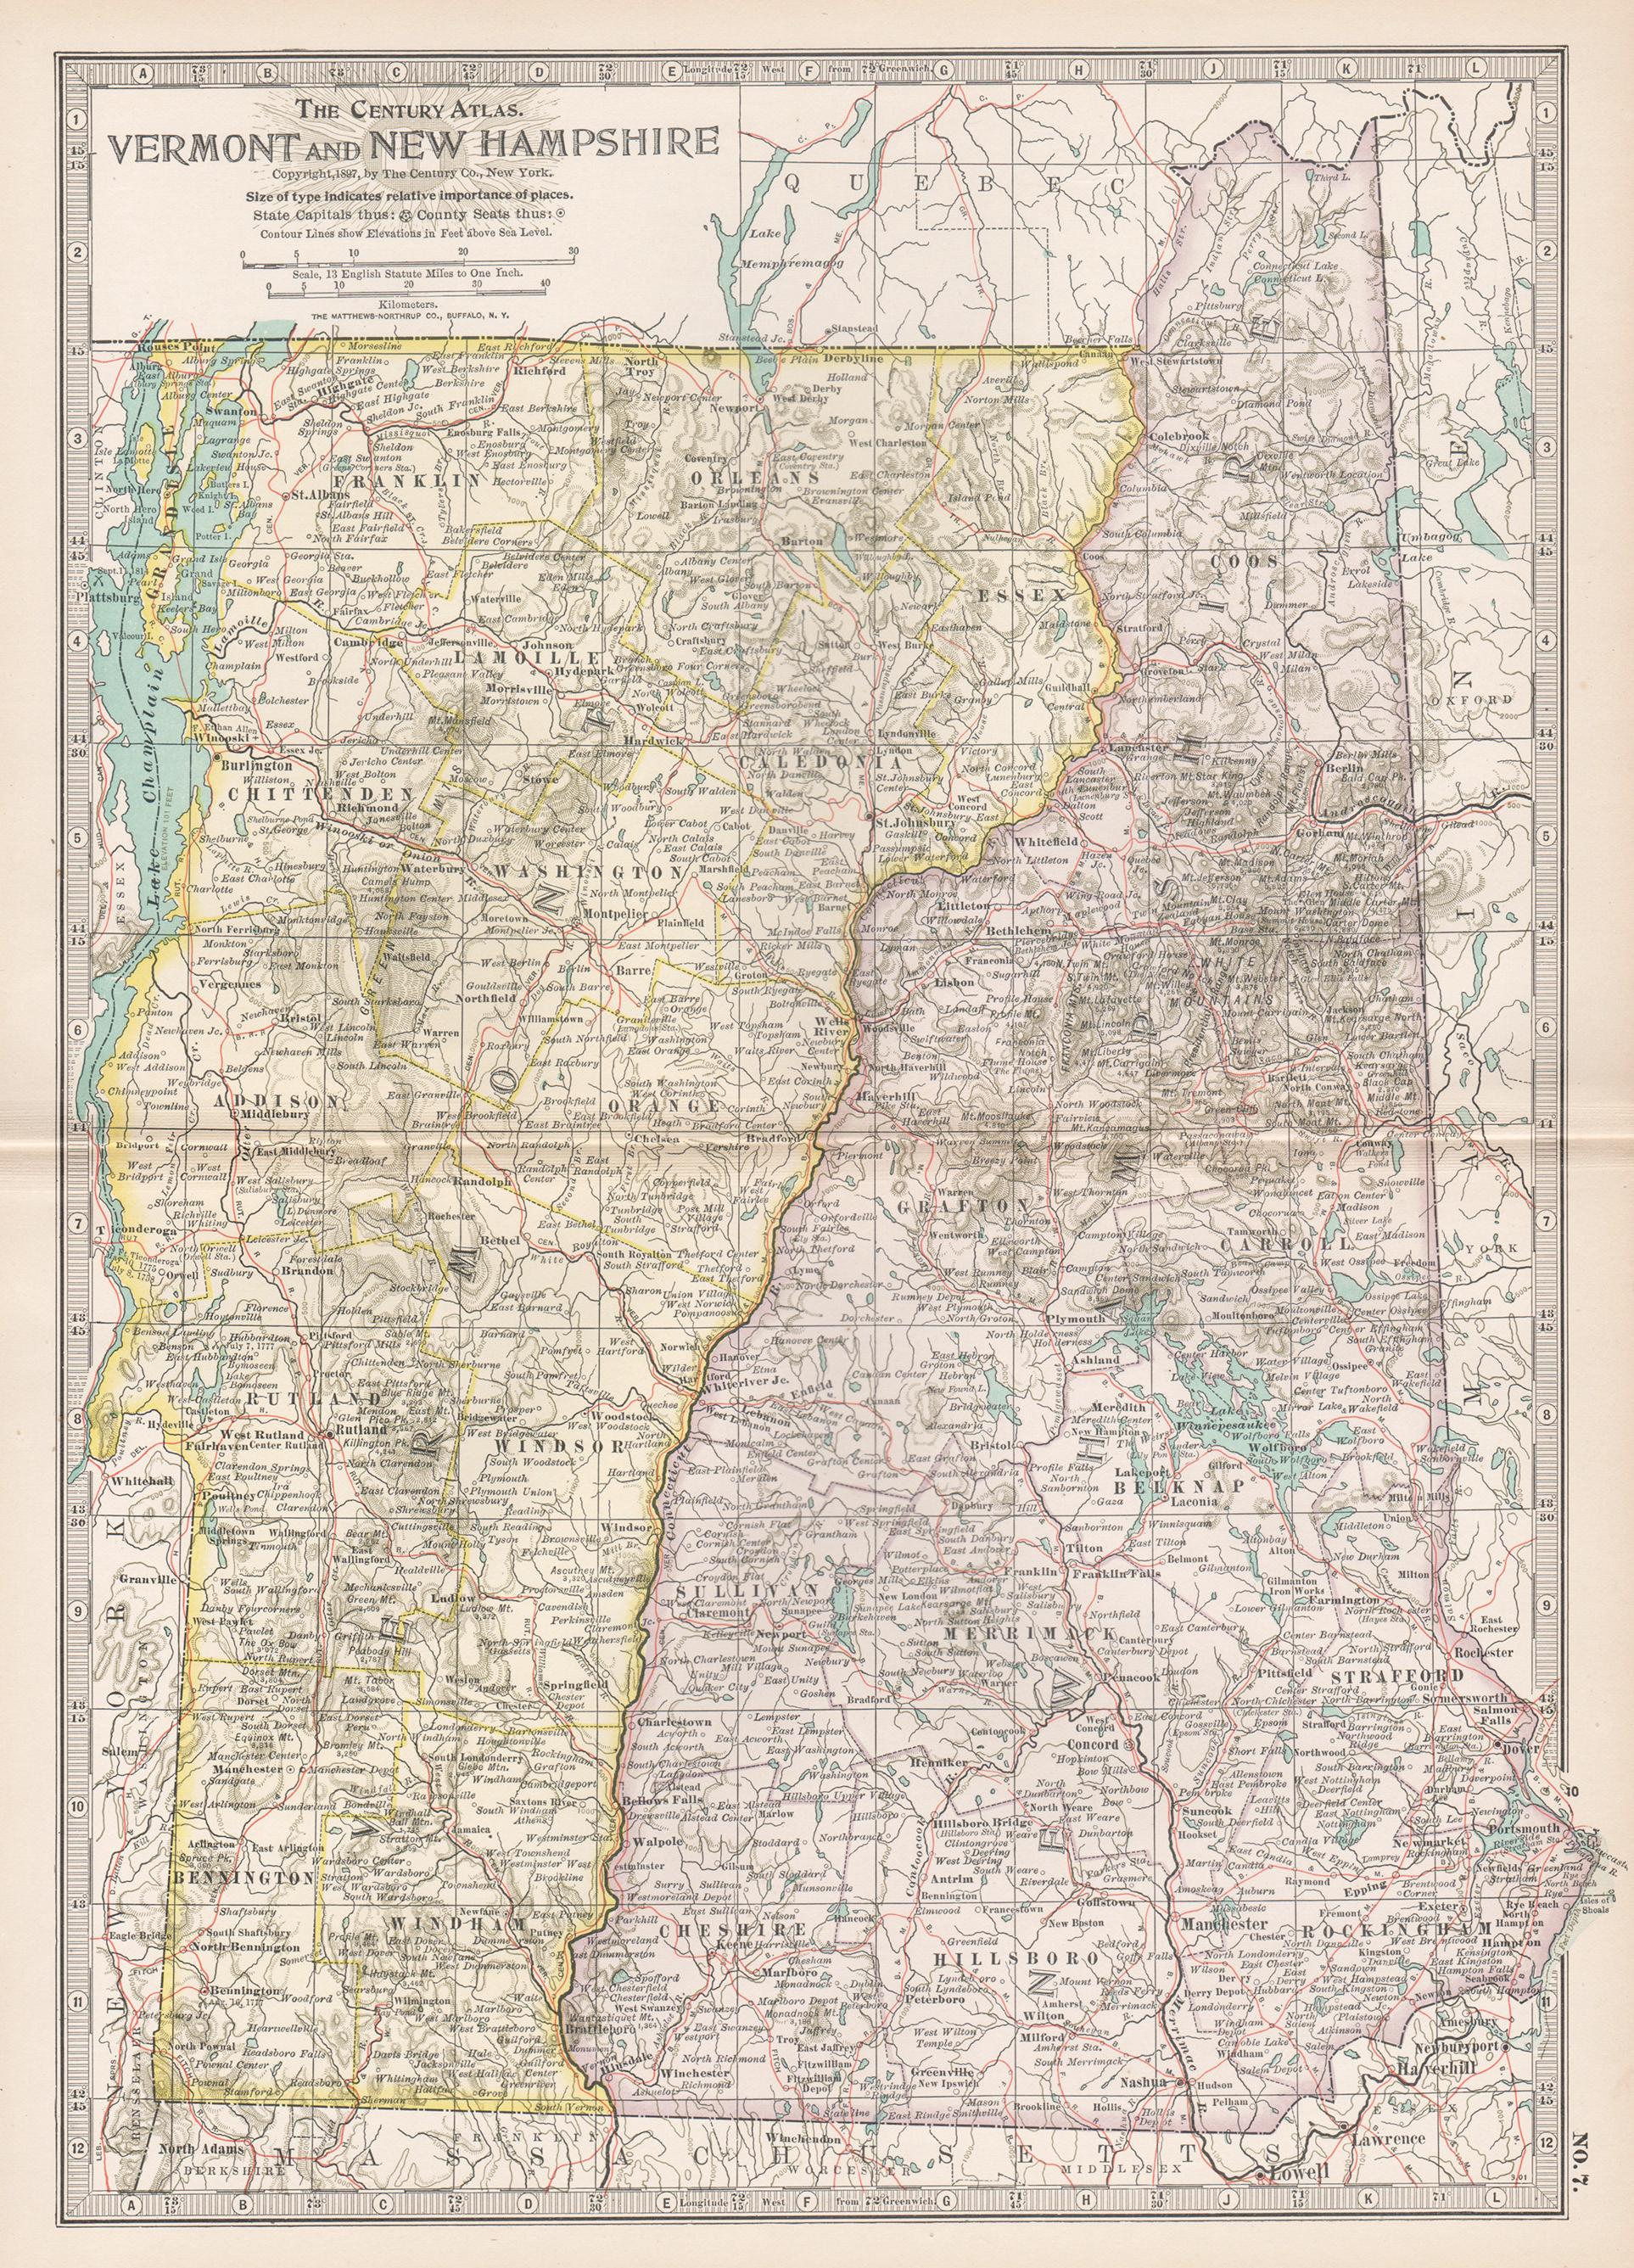 Unknown Print - Vermont and New Hampshire. USA Century Atlas state antique vintage map